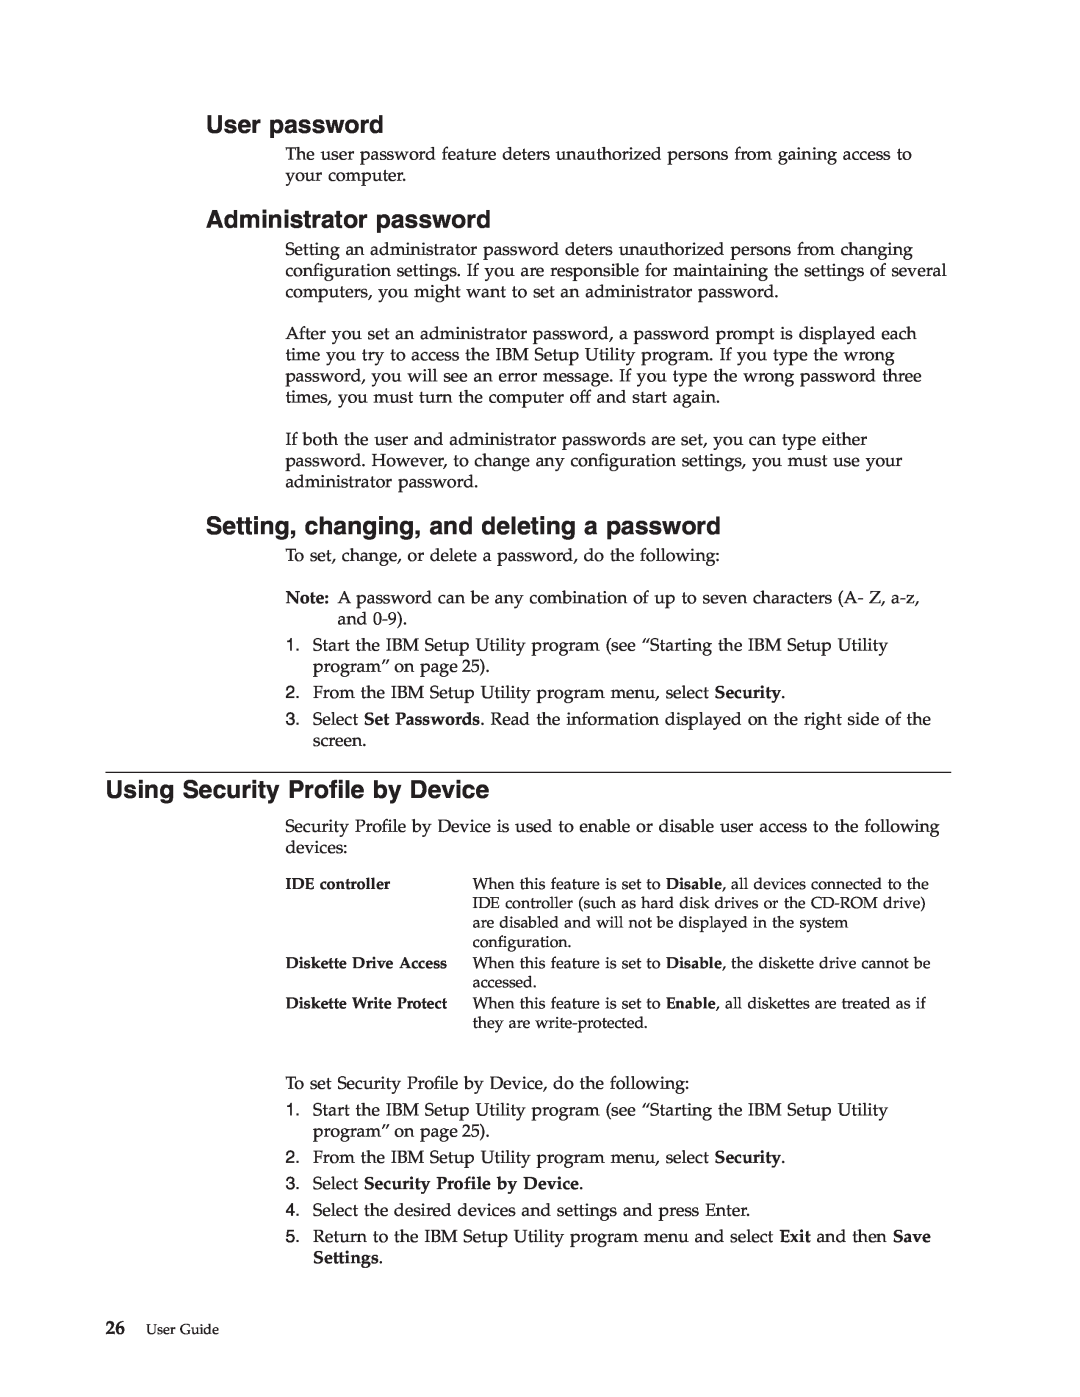 IBM 6824, 2289 manual User password, Administrator password, Setting, changing, and deleting a password 